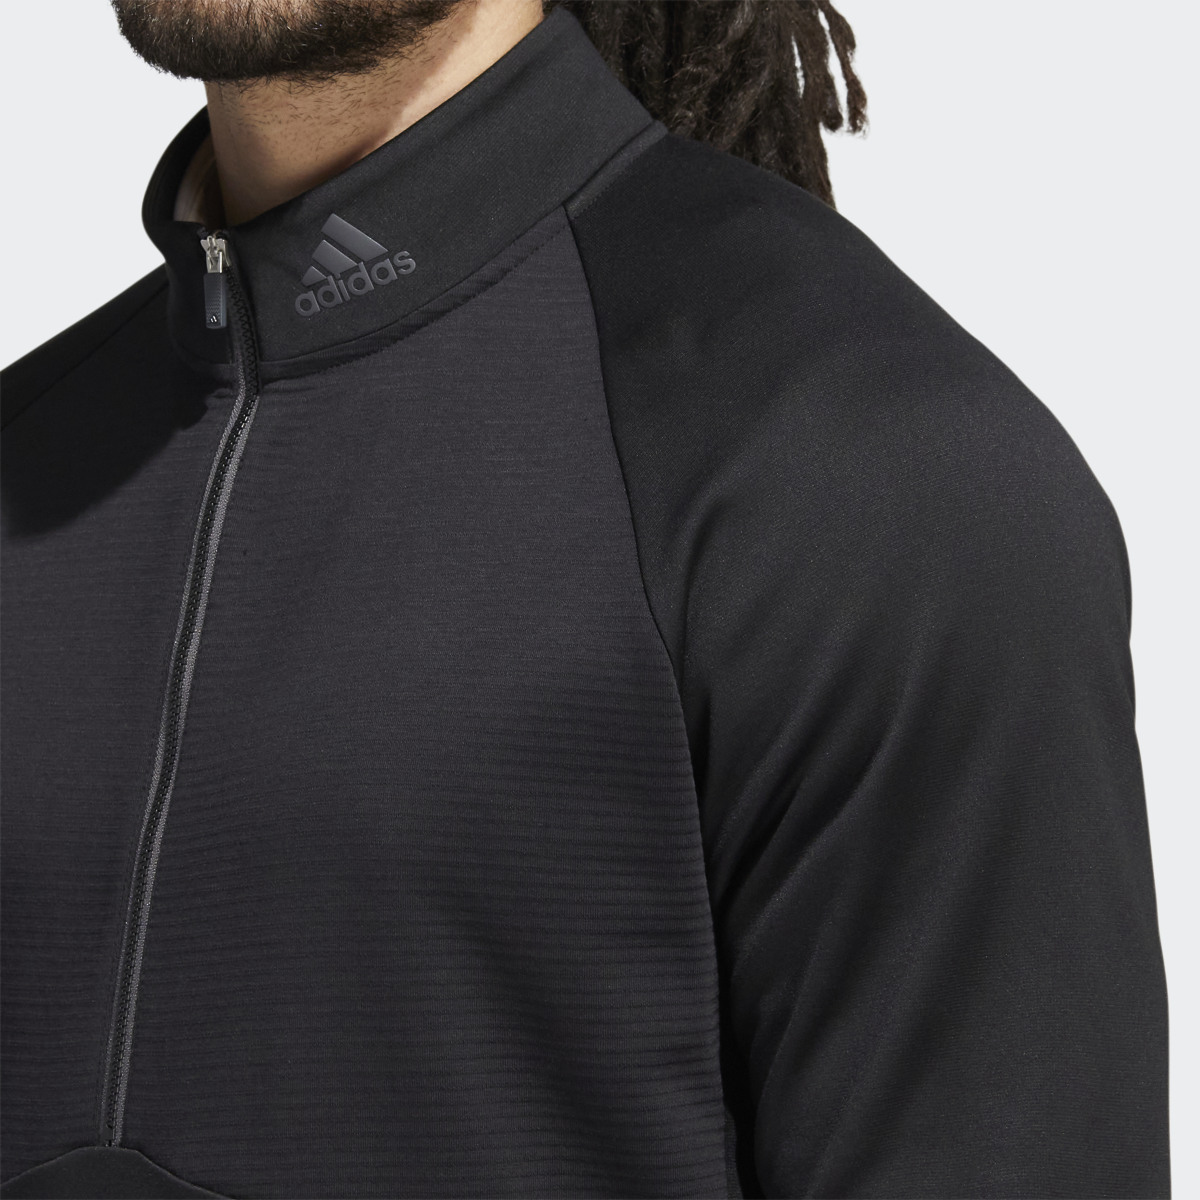 Adidas COLD.RDY 1/4-Zip Pullover. 6